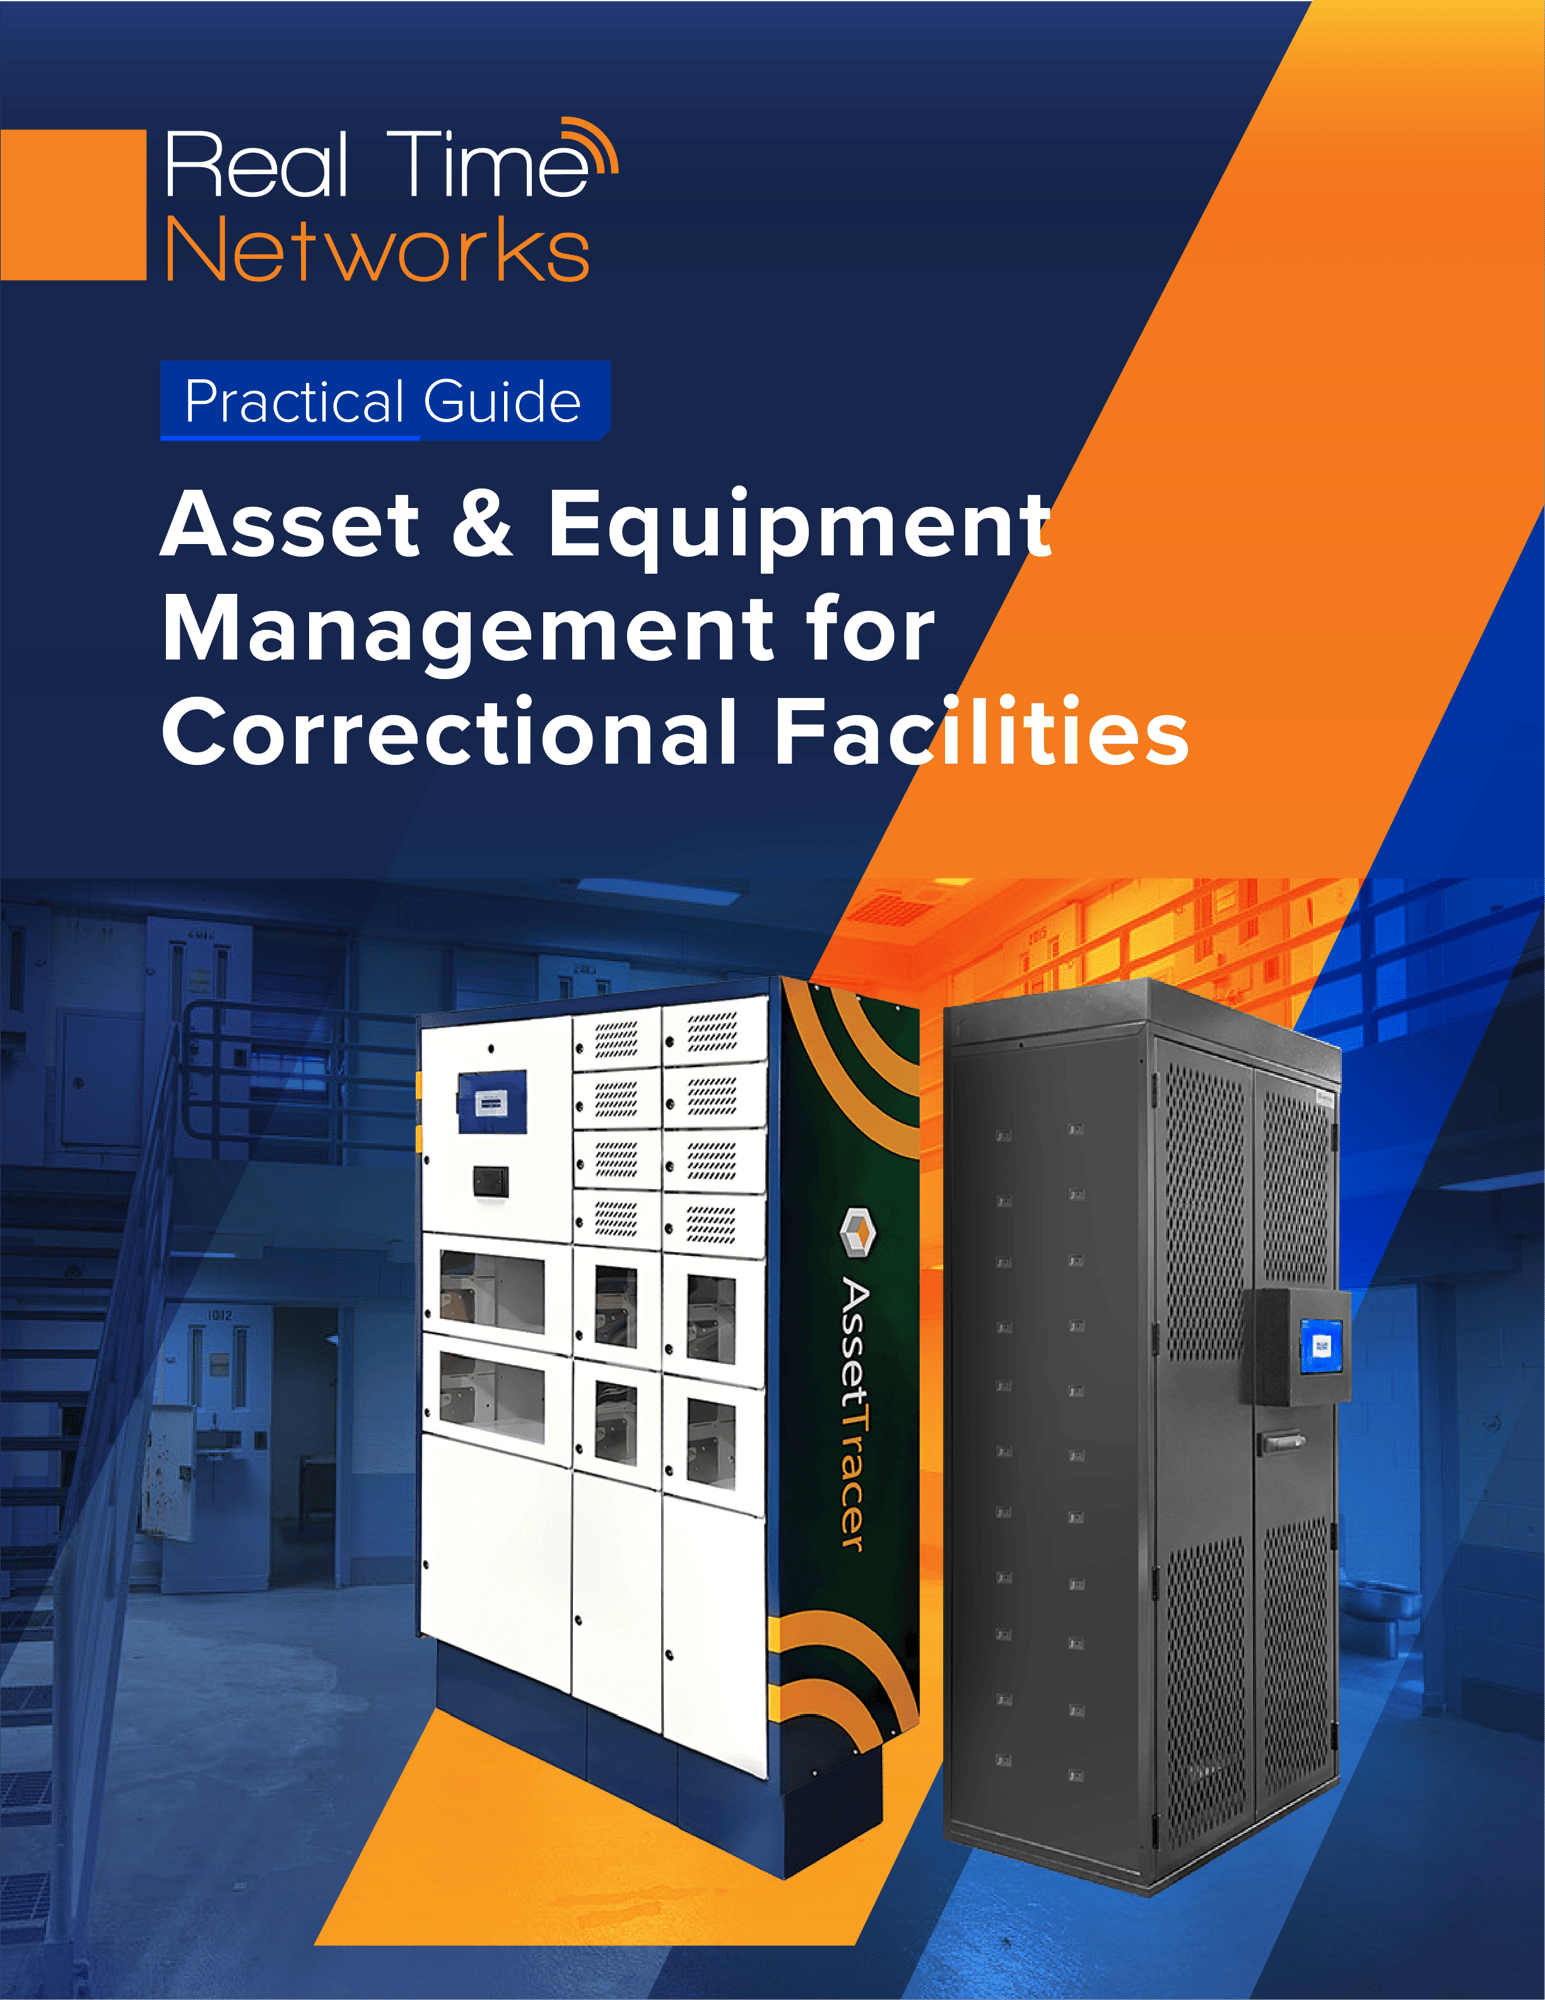 Practical Guide to Asset & Equipment Management for Correctional Facilities